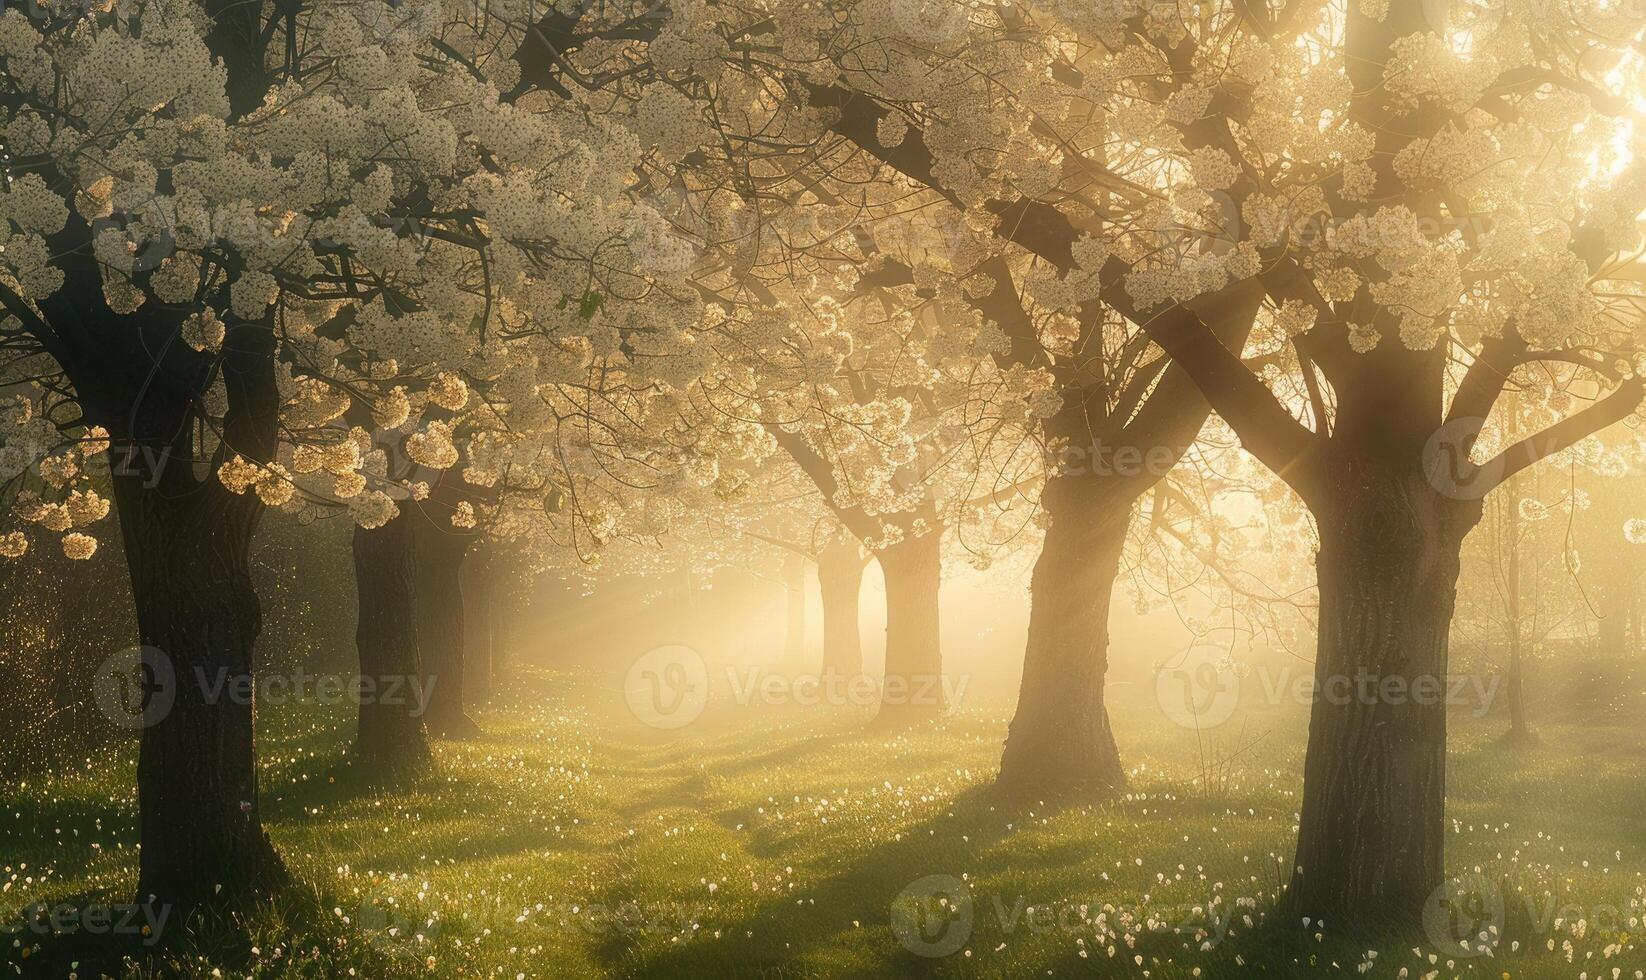 Sunlight filtering through a canopy of blossoming cherry trees in a peaceful garden photo